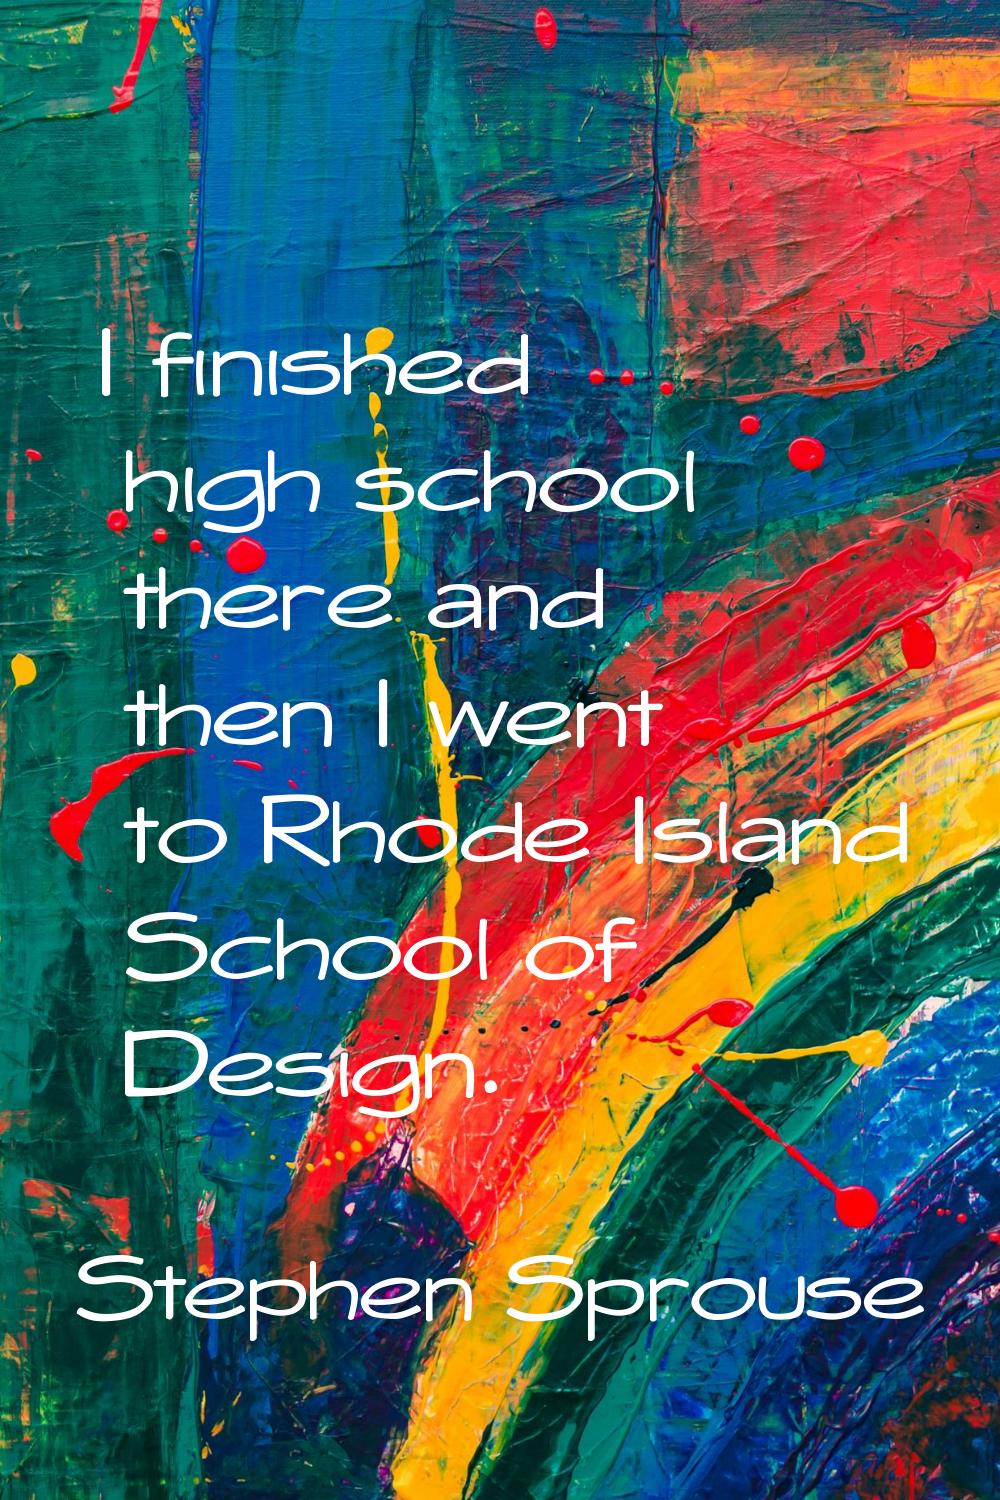 I finished high school there and then I went to Rhode Island School of Design.